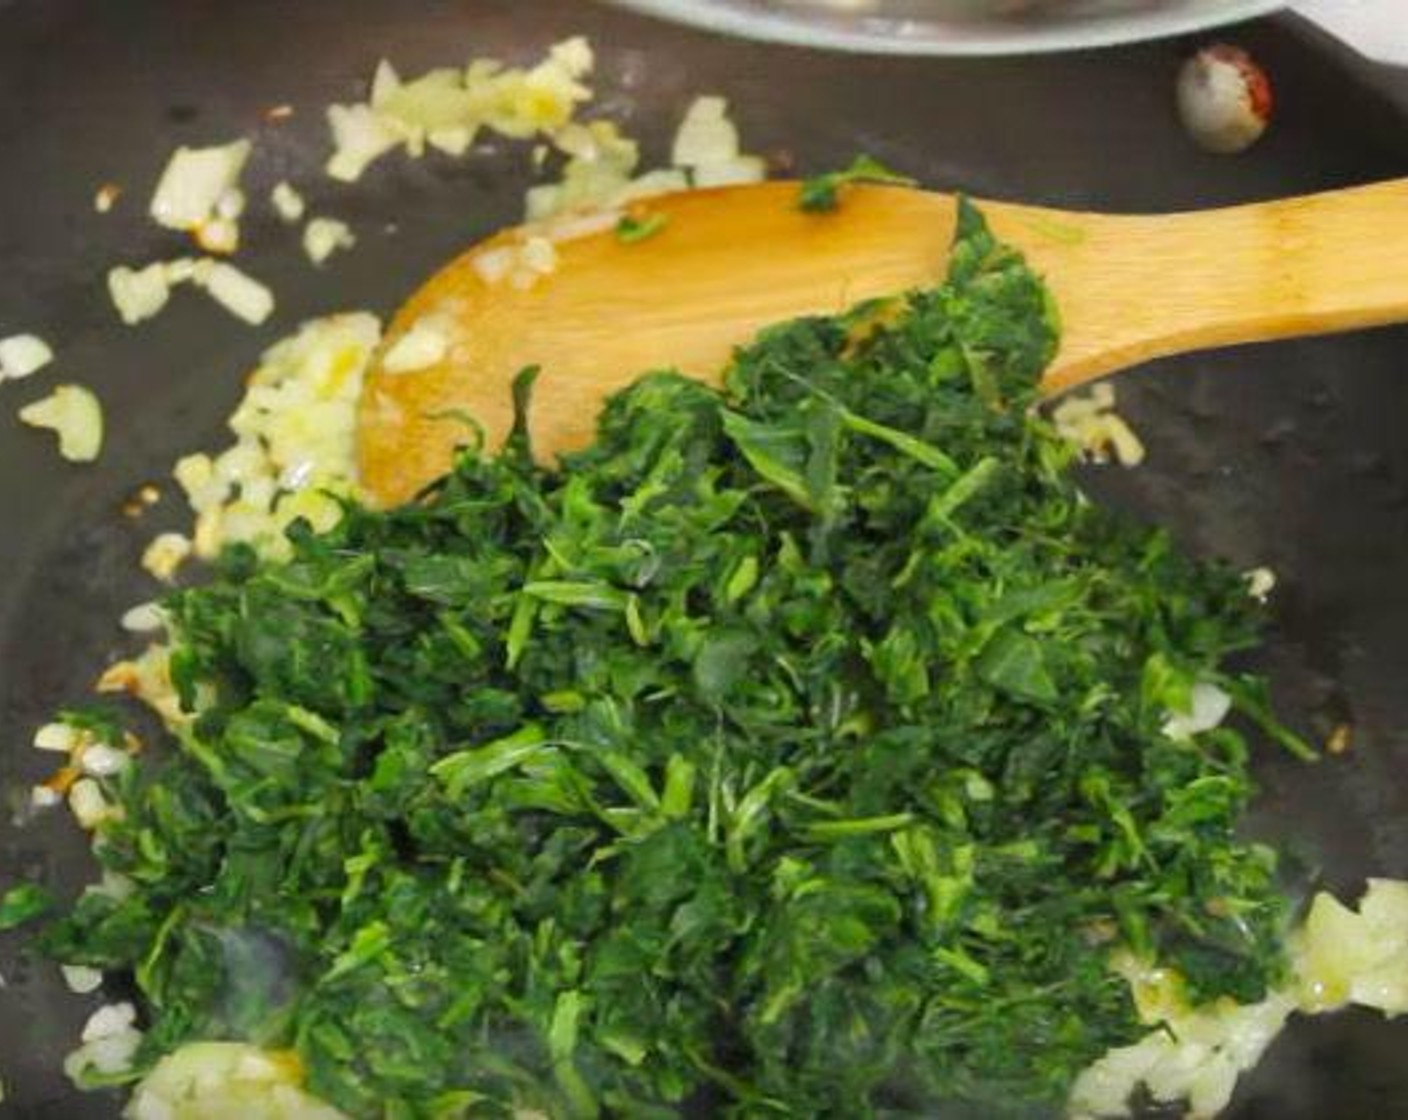 step 2 In a pan, add Olive Oil (2 Tbsp), and soften the Onion (1) and Garlic (2 cloves). Then, add Frozen Spinach (2 cups) stir and season with Salt (to taste) and Ground Black Pepper (to taste). Cook for about 1 minutes and stir constantly. Transfer to a bowl and set aside.